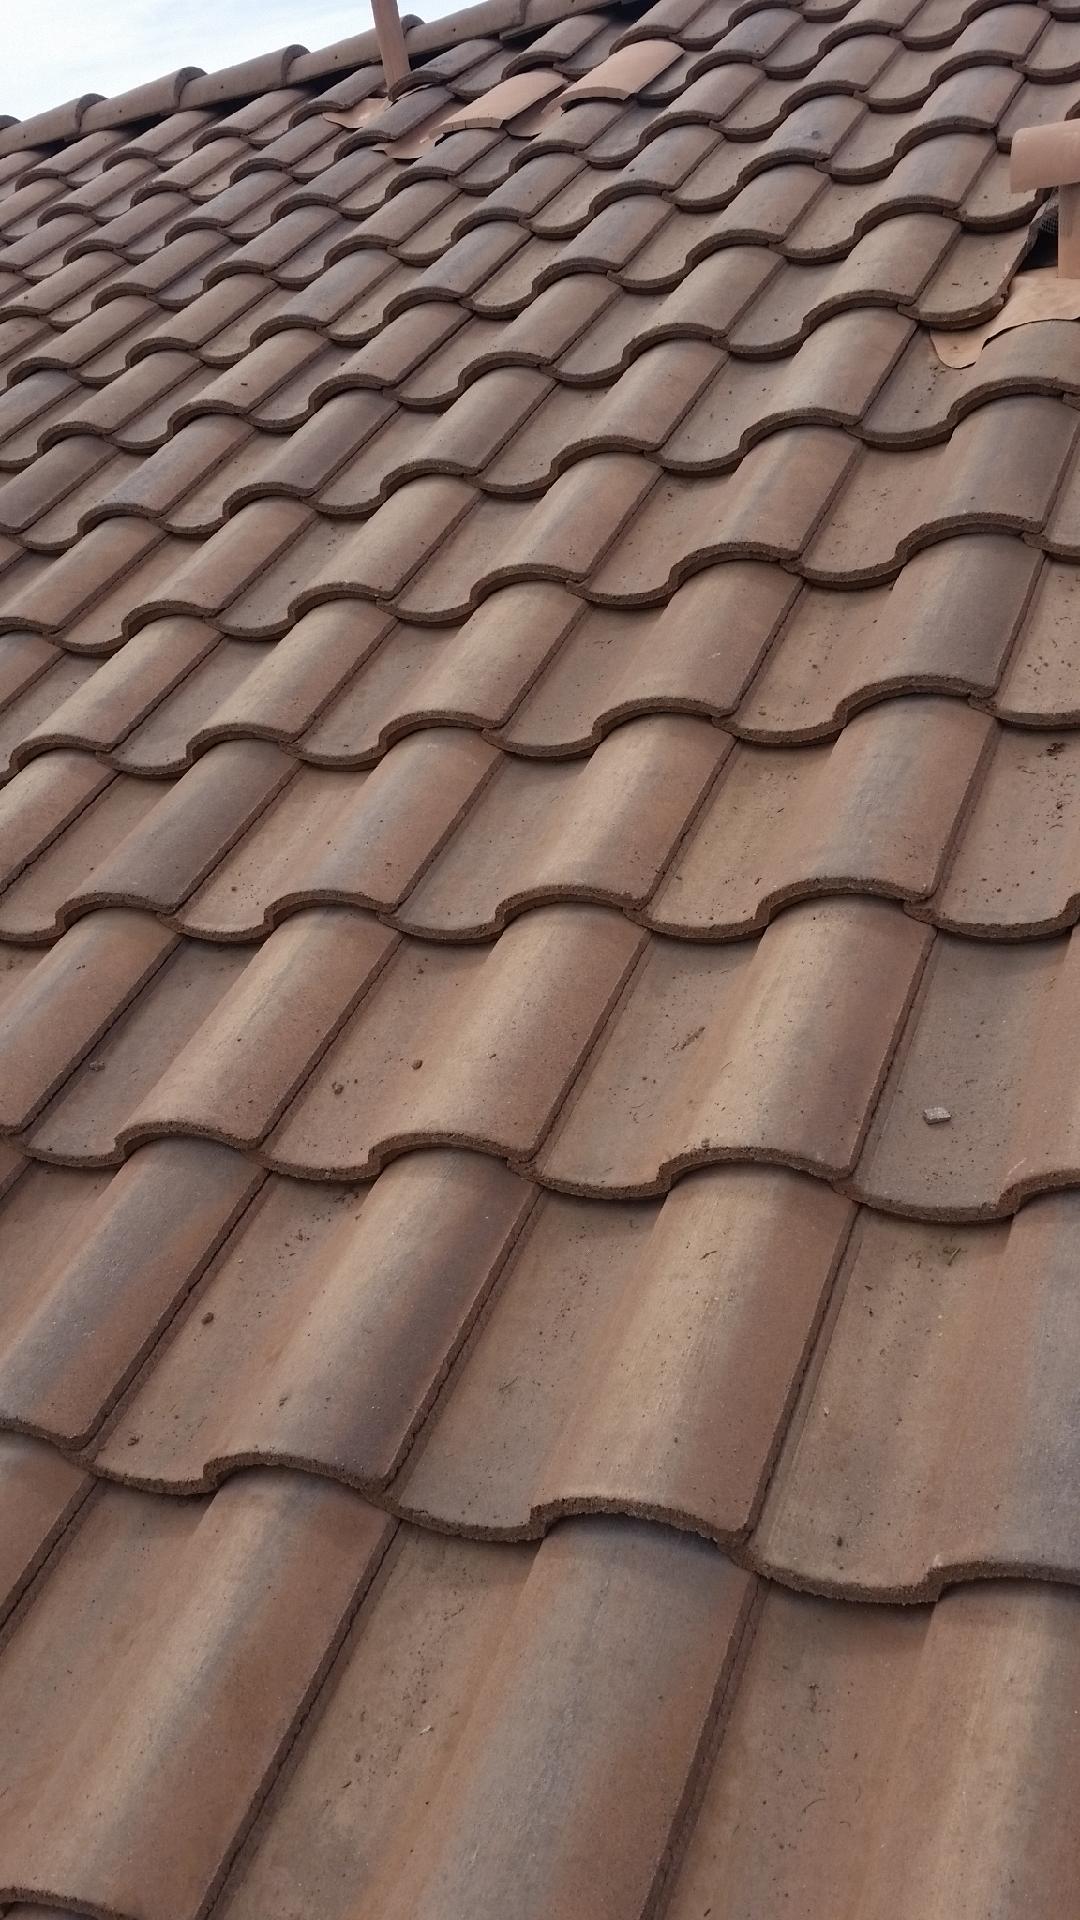 Showing completed tile roof repair.